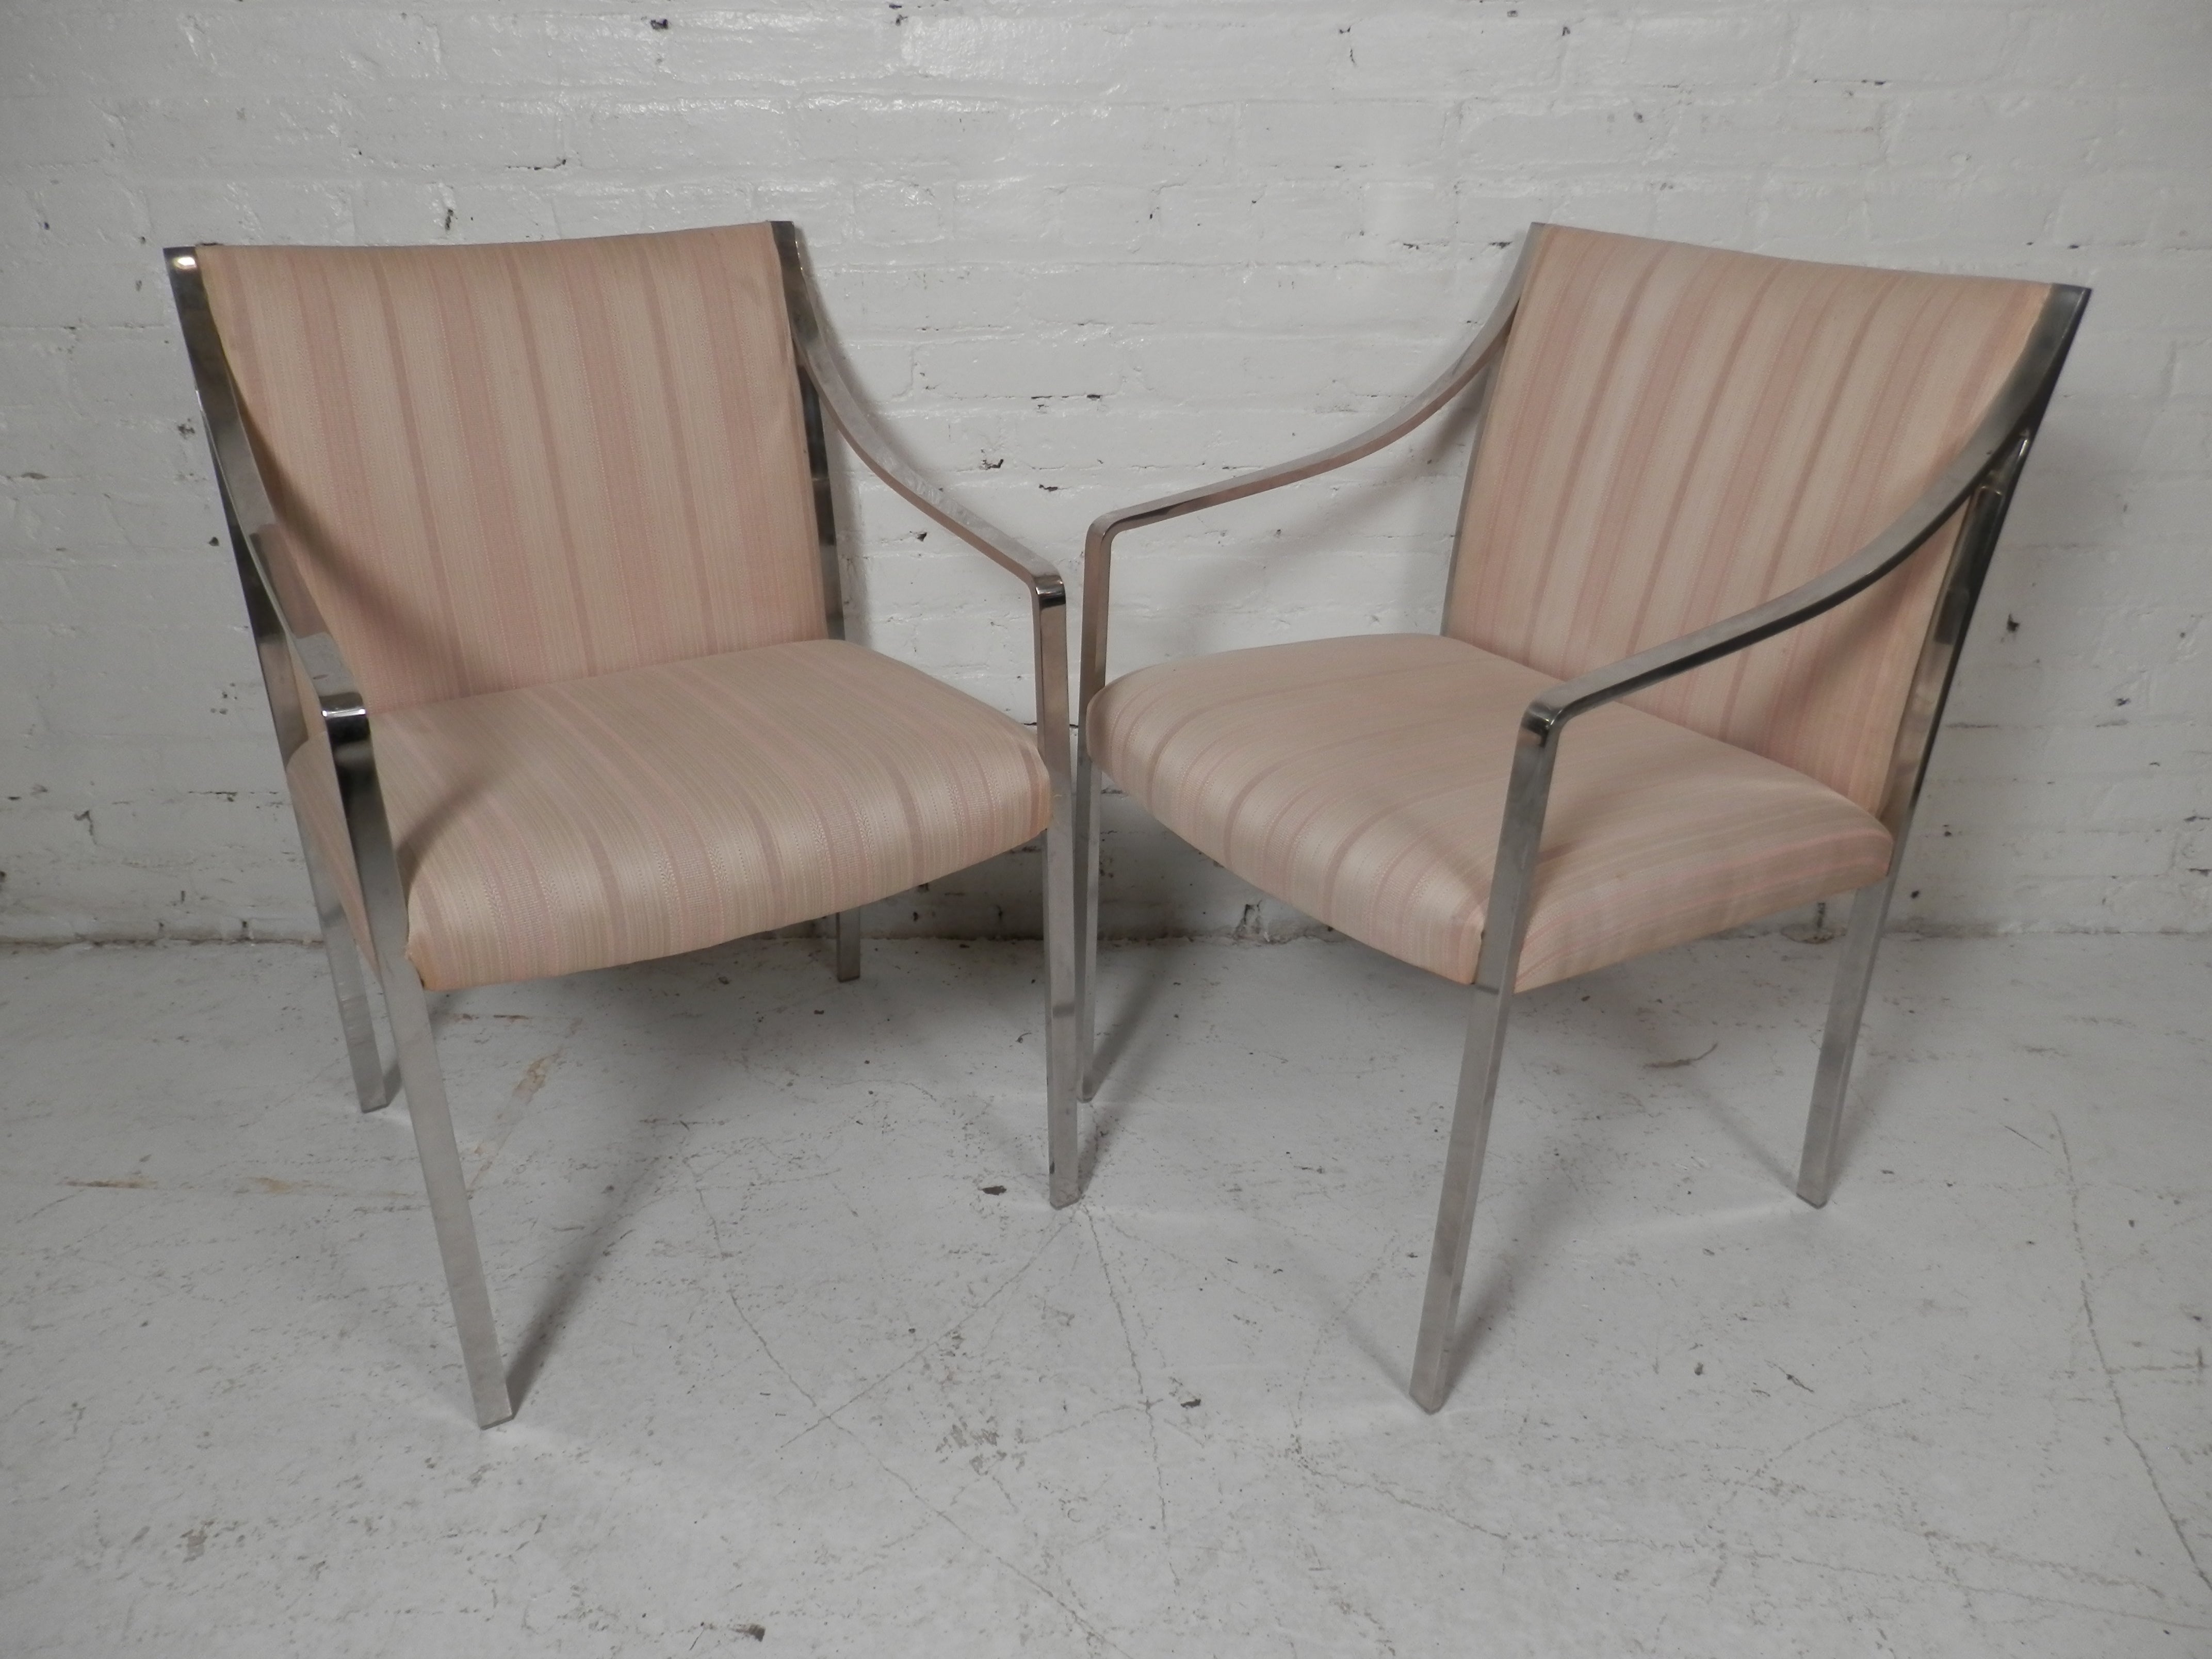 Pair Of Arm Chairs By Stow Davis